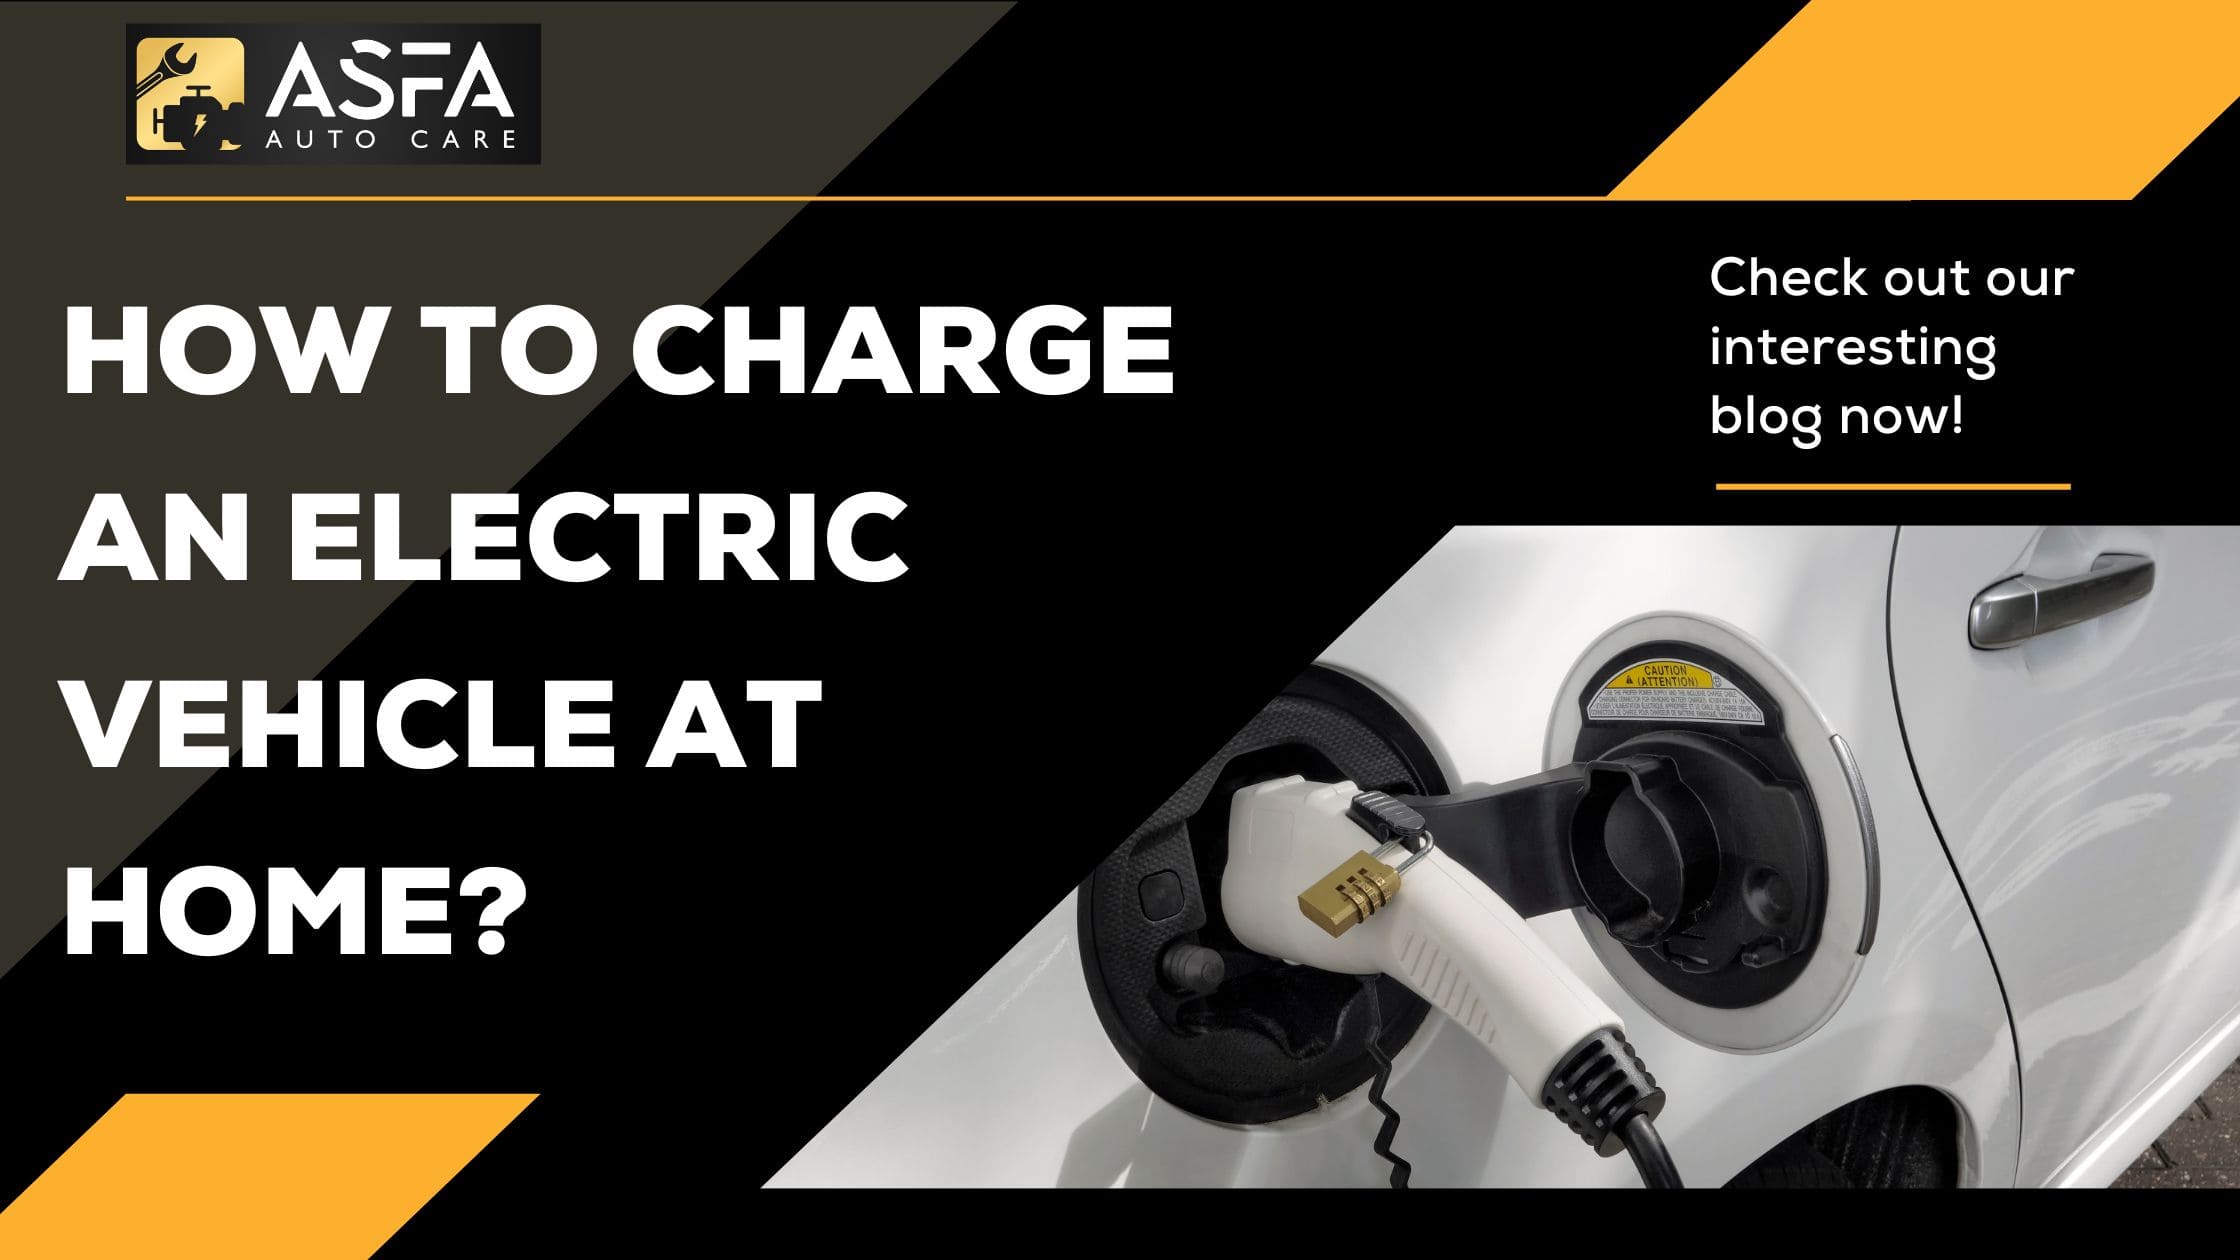 How To Charge An Electric Vehicle At Home?